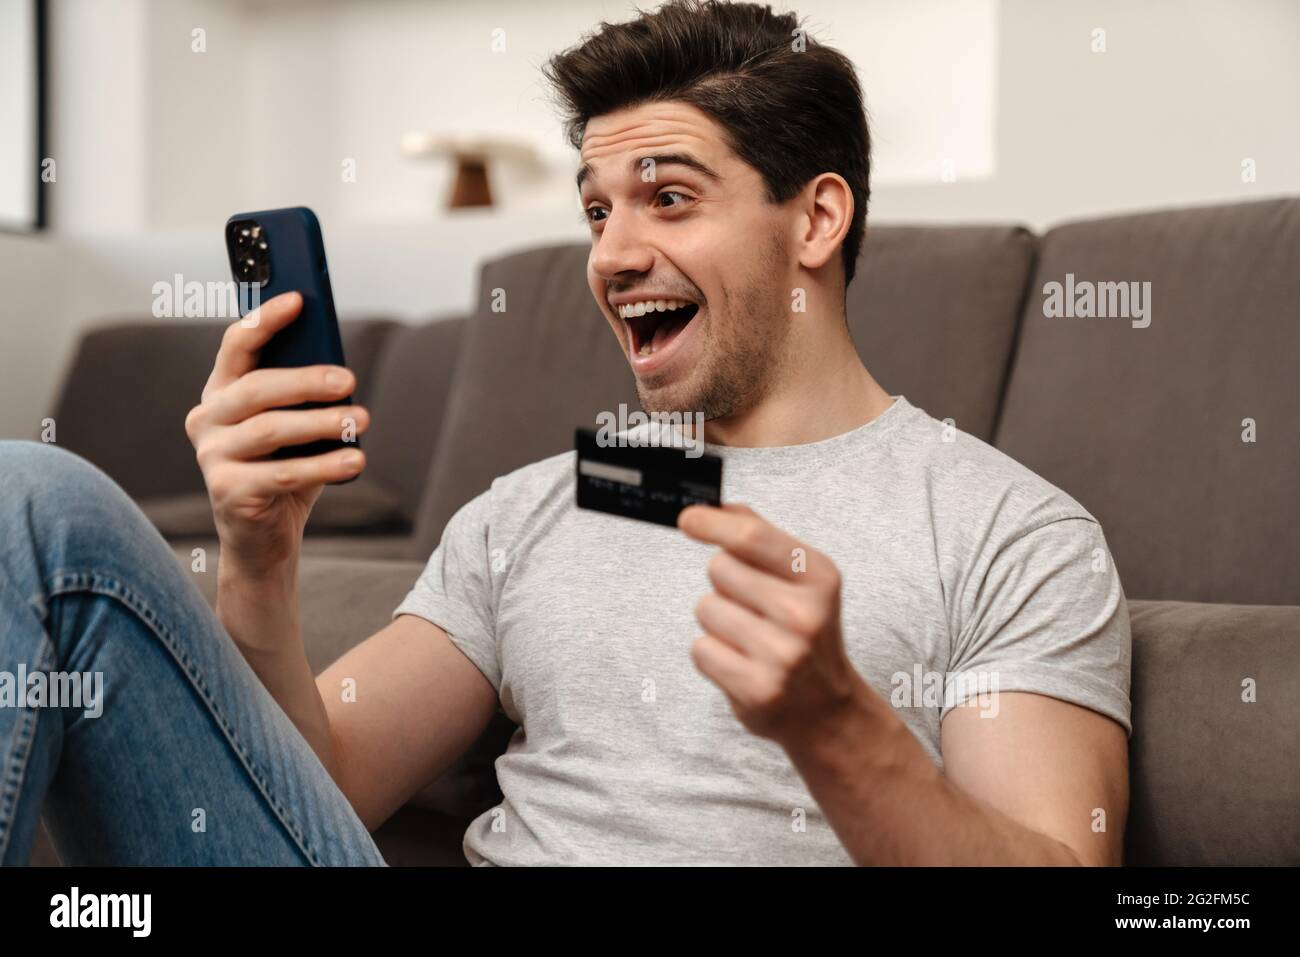 Excited brunette guy using mobile phone and credit card while sitting on floor at home Stock Photo